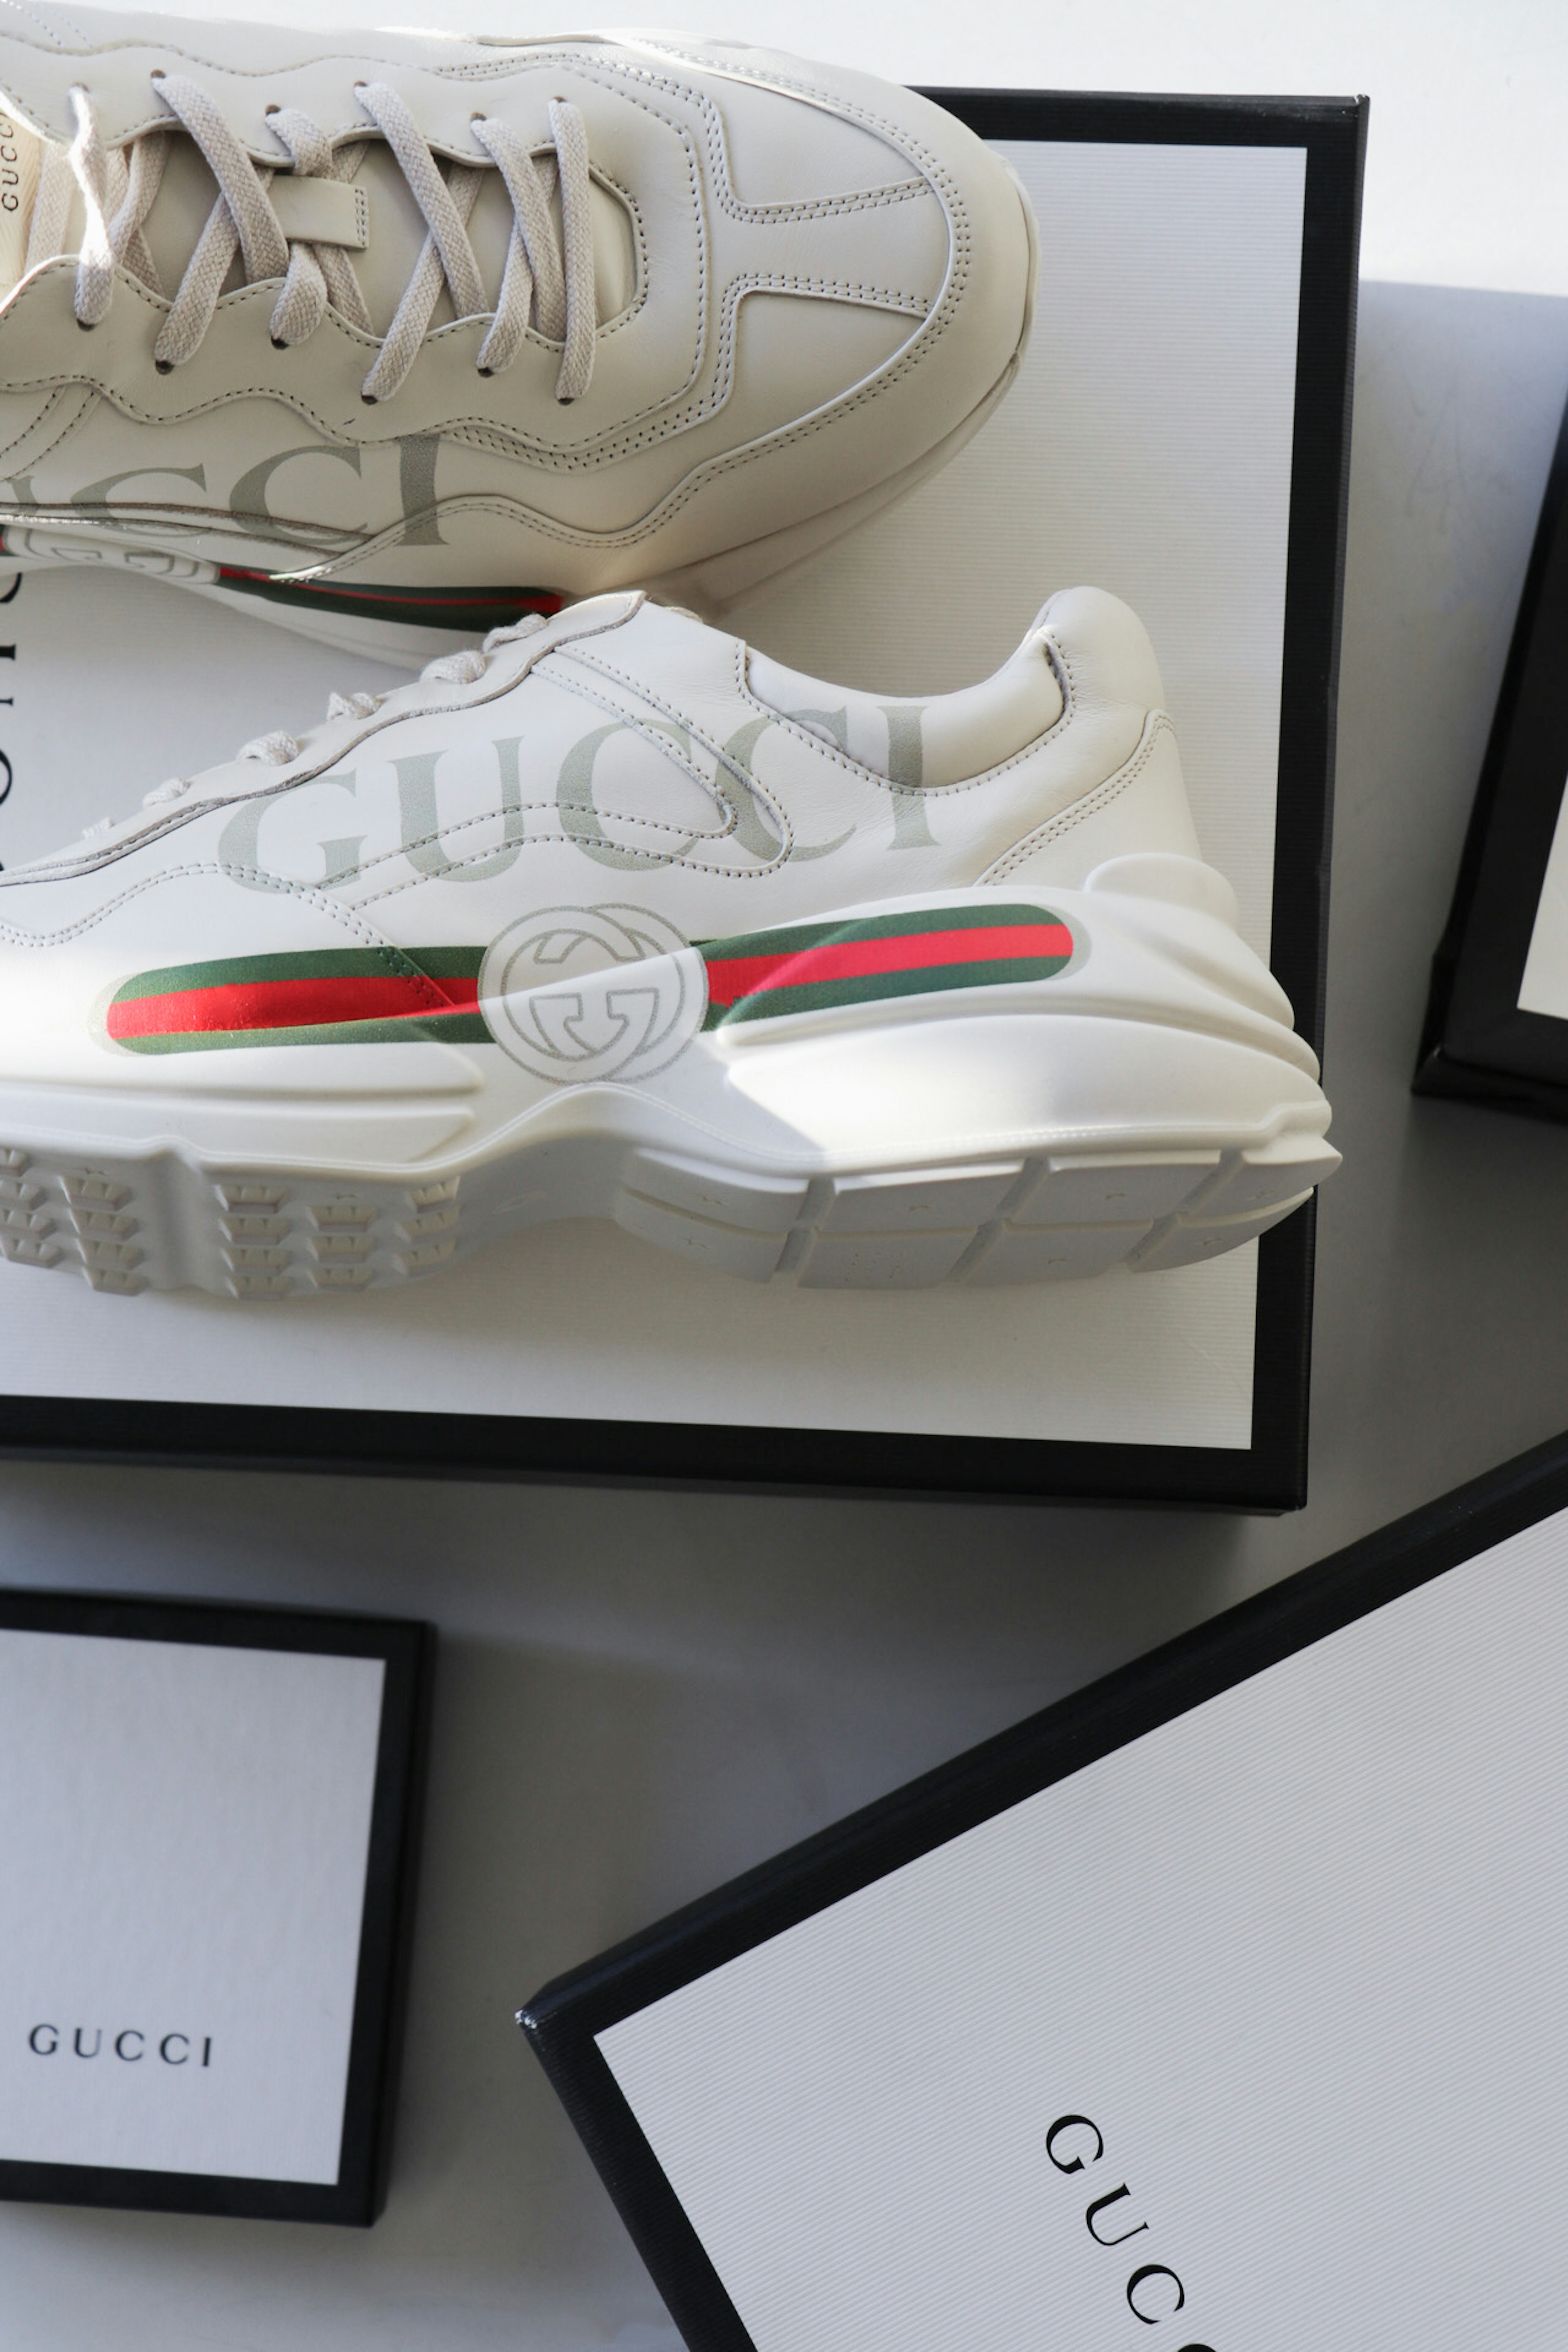 white red and green gucci shoes